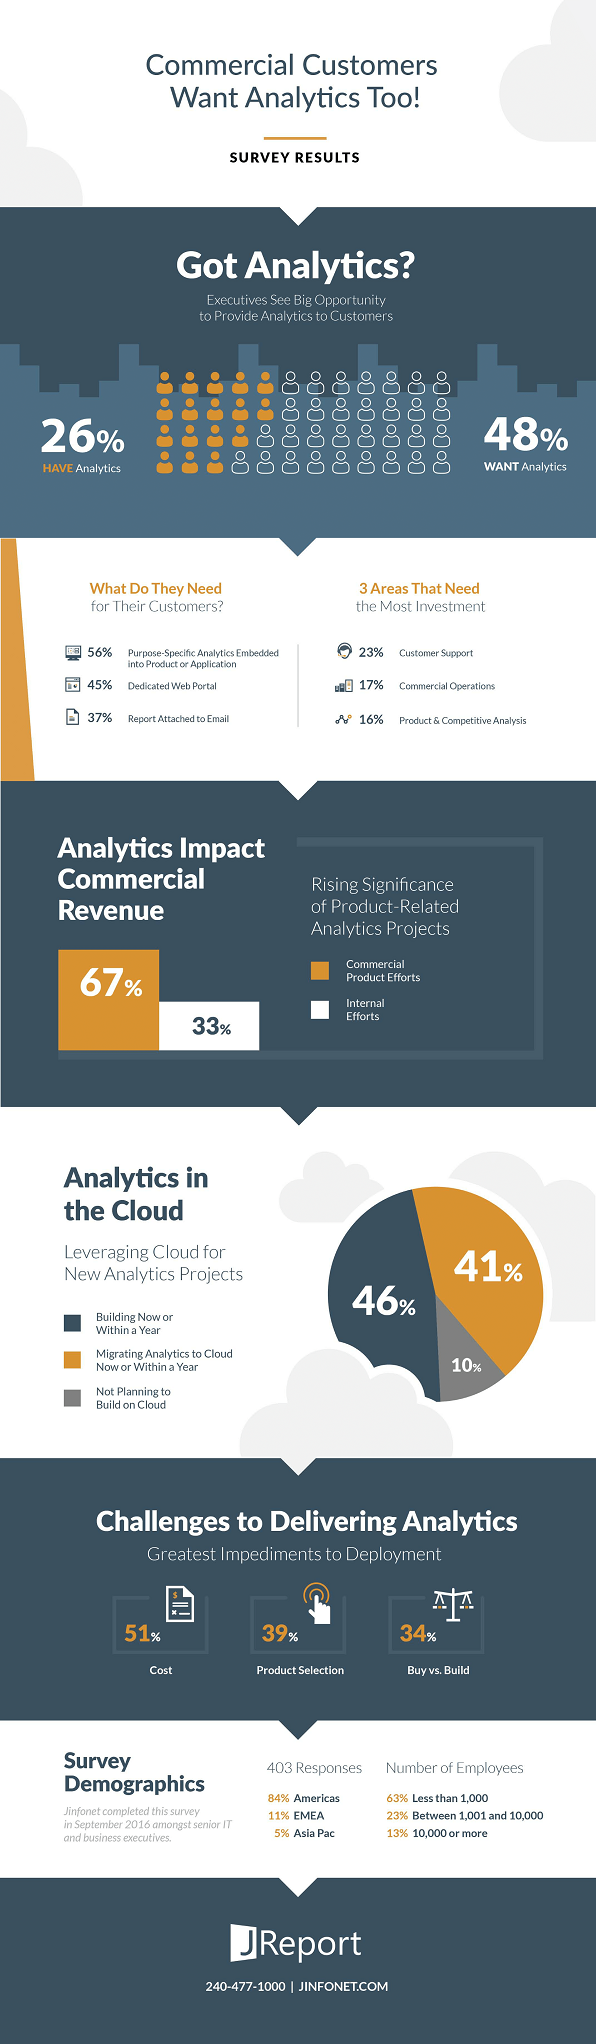 commericial-customers-want-analytics-1